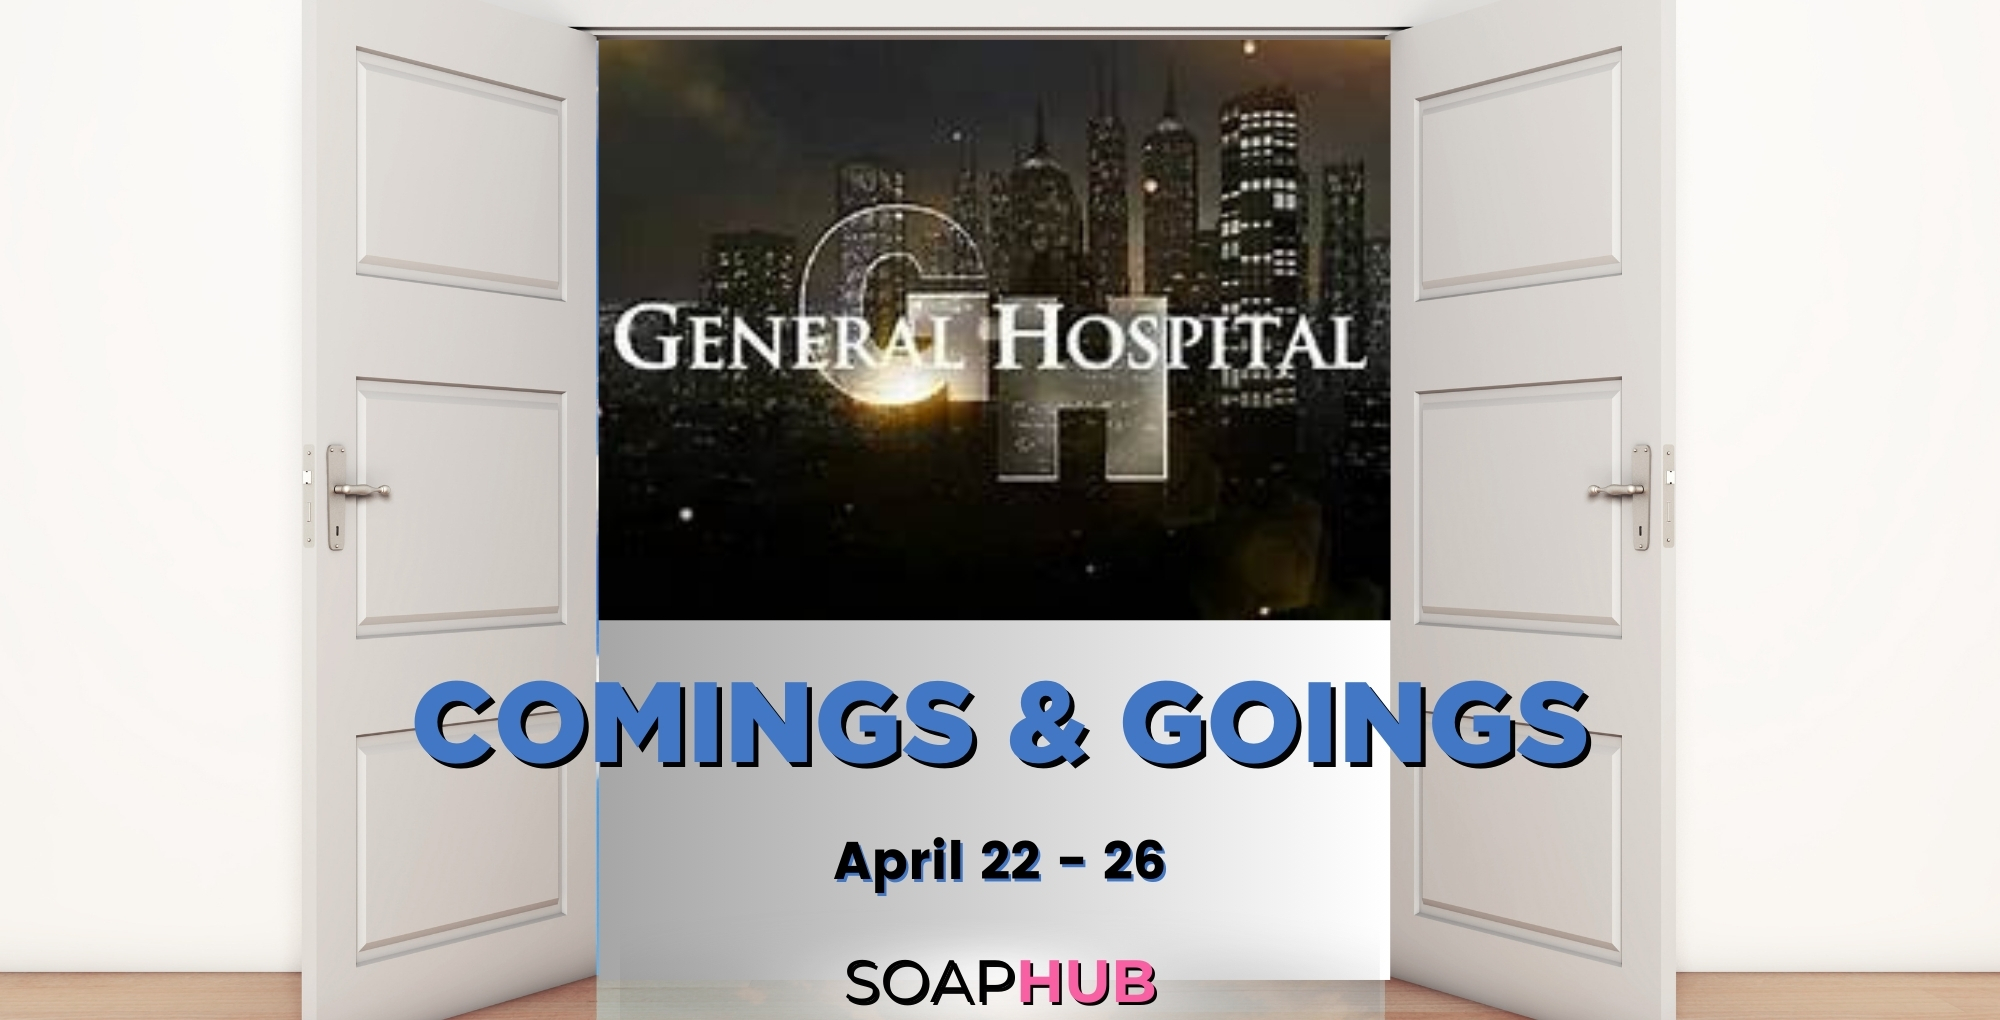 General Hospital comings and goings for April 22-26 with the Soap Hub logo across the bottom.